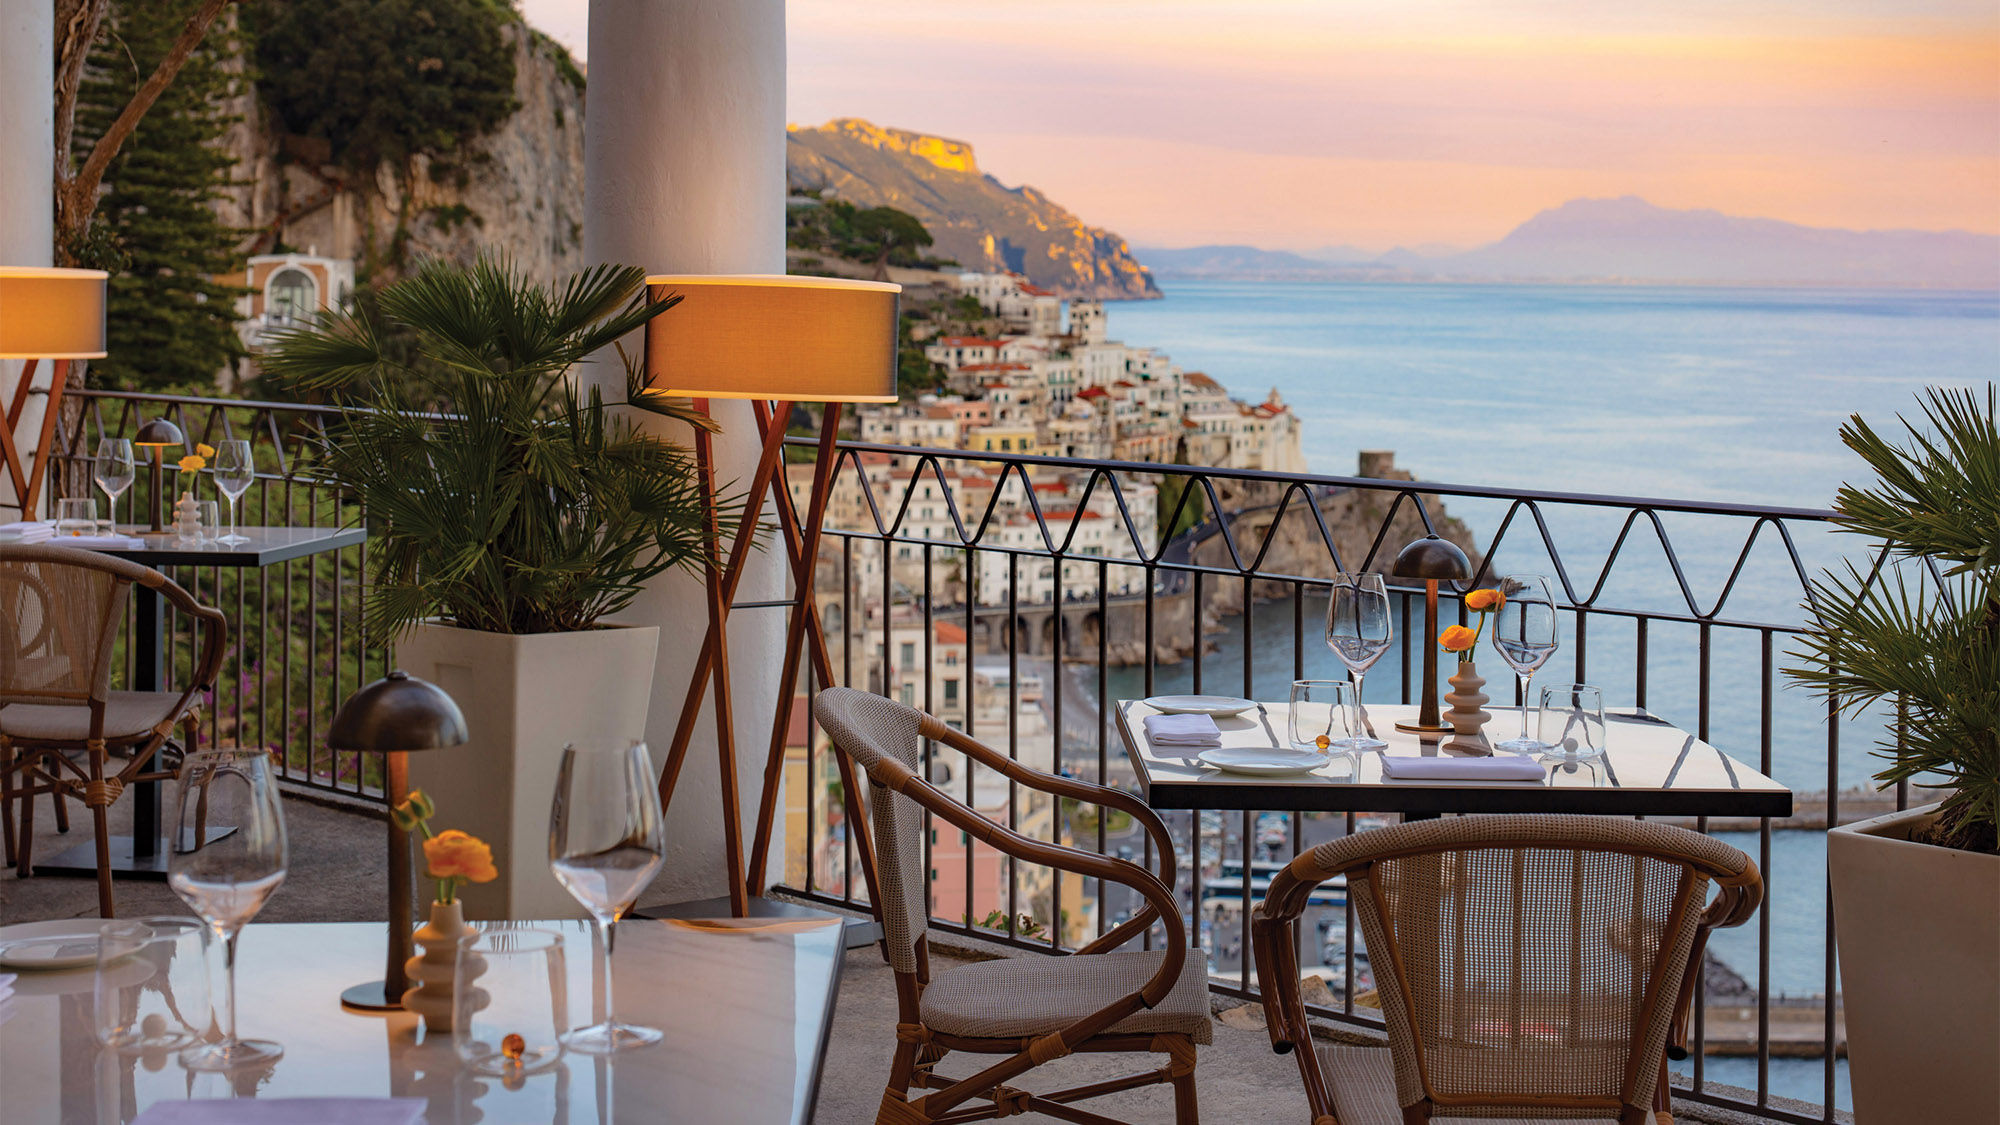 Dei Cappuccini restaurant offers alfresco dining for breakfast and dinner.